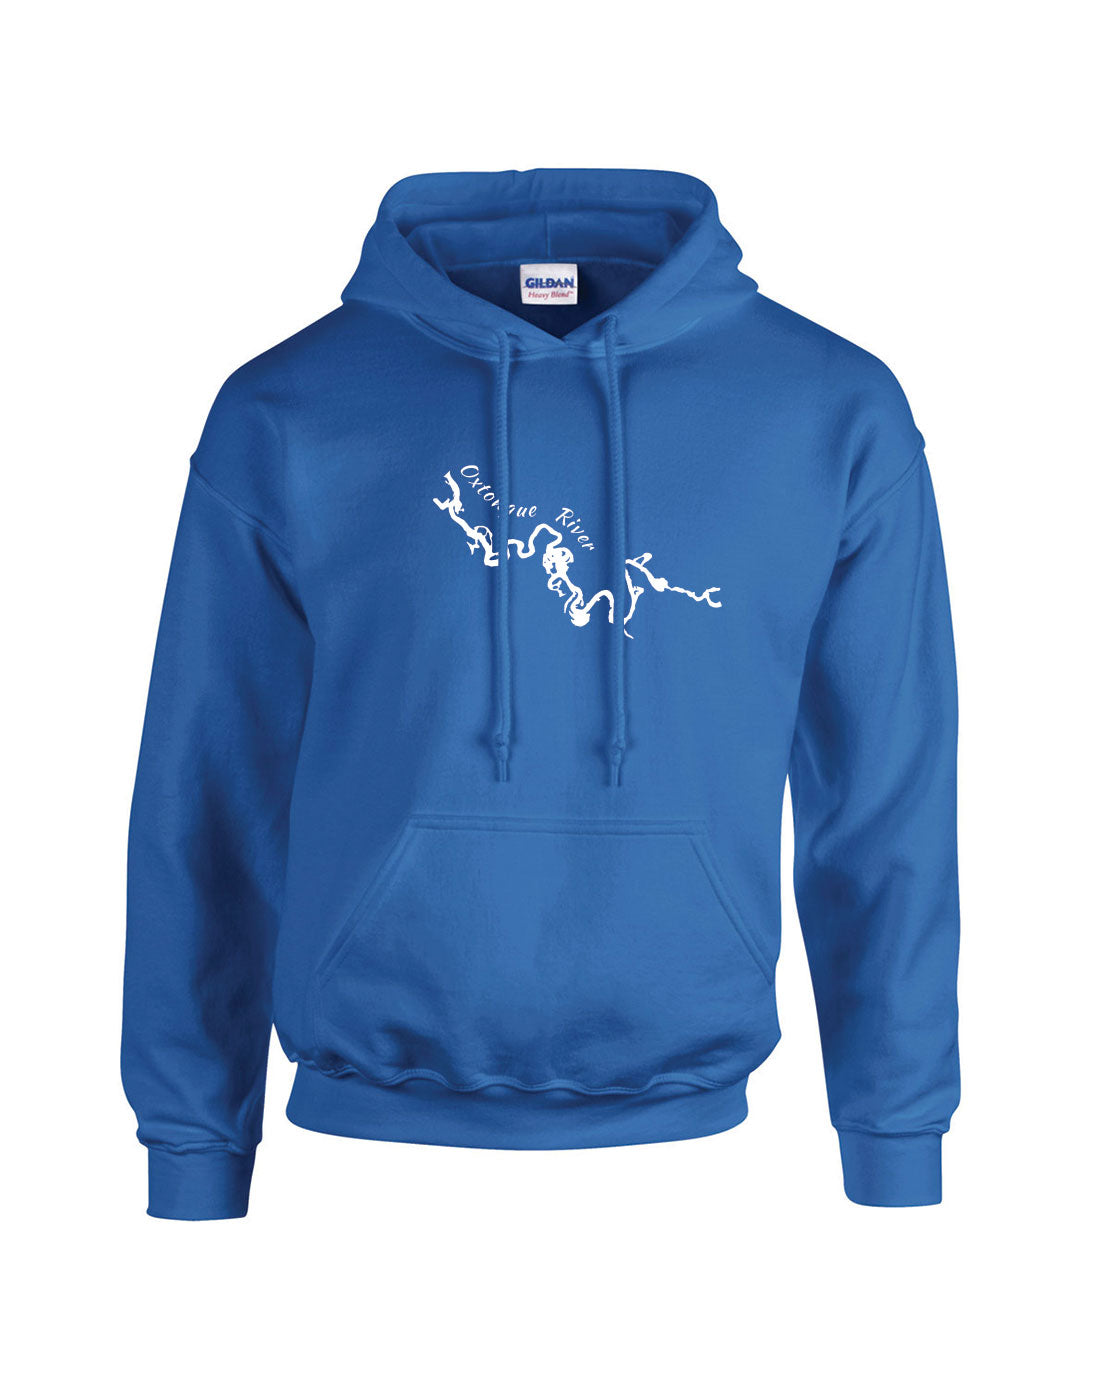 Oxtongue River Hoodie